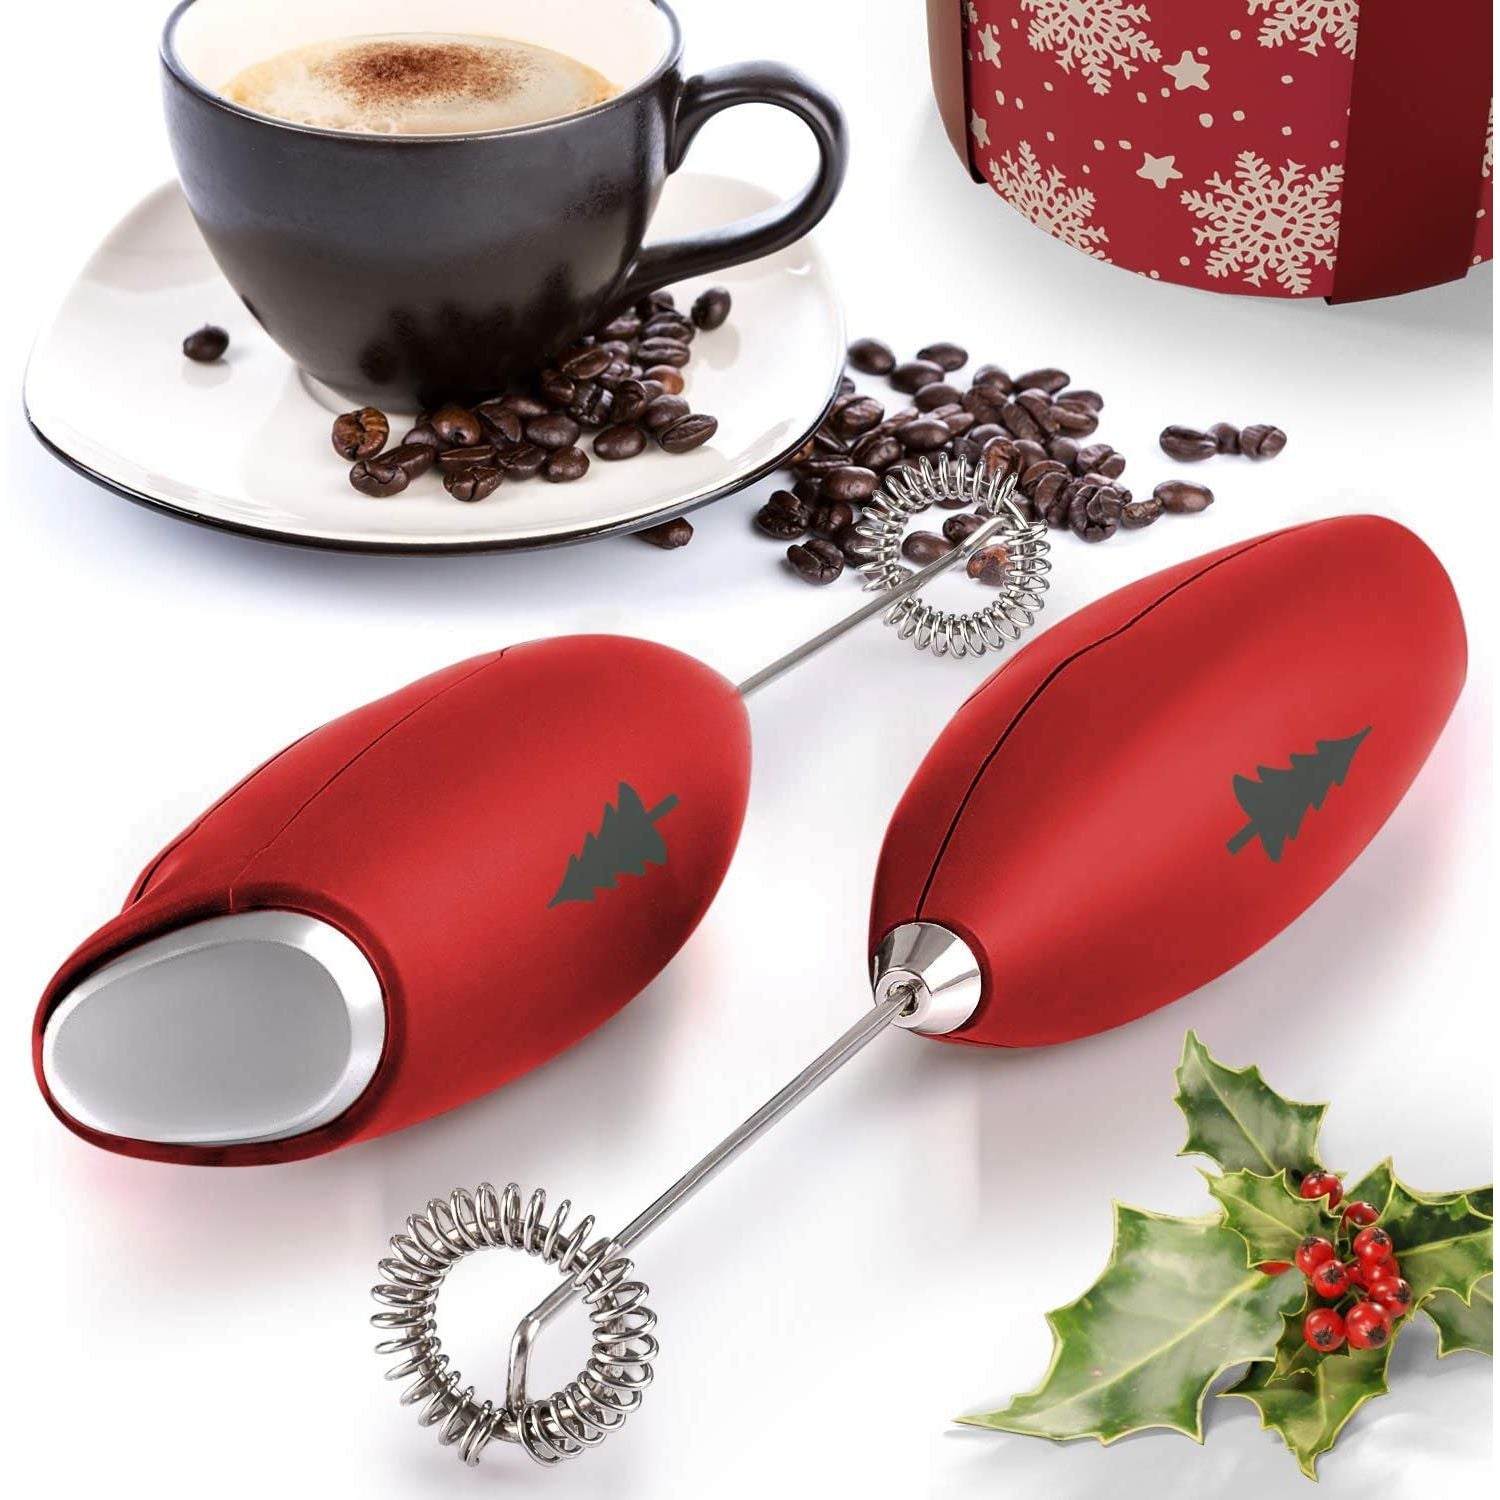 Zulay Kitchen Milk Frother With Stand (Christmas Edition) - Yahoo Shopping